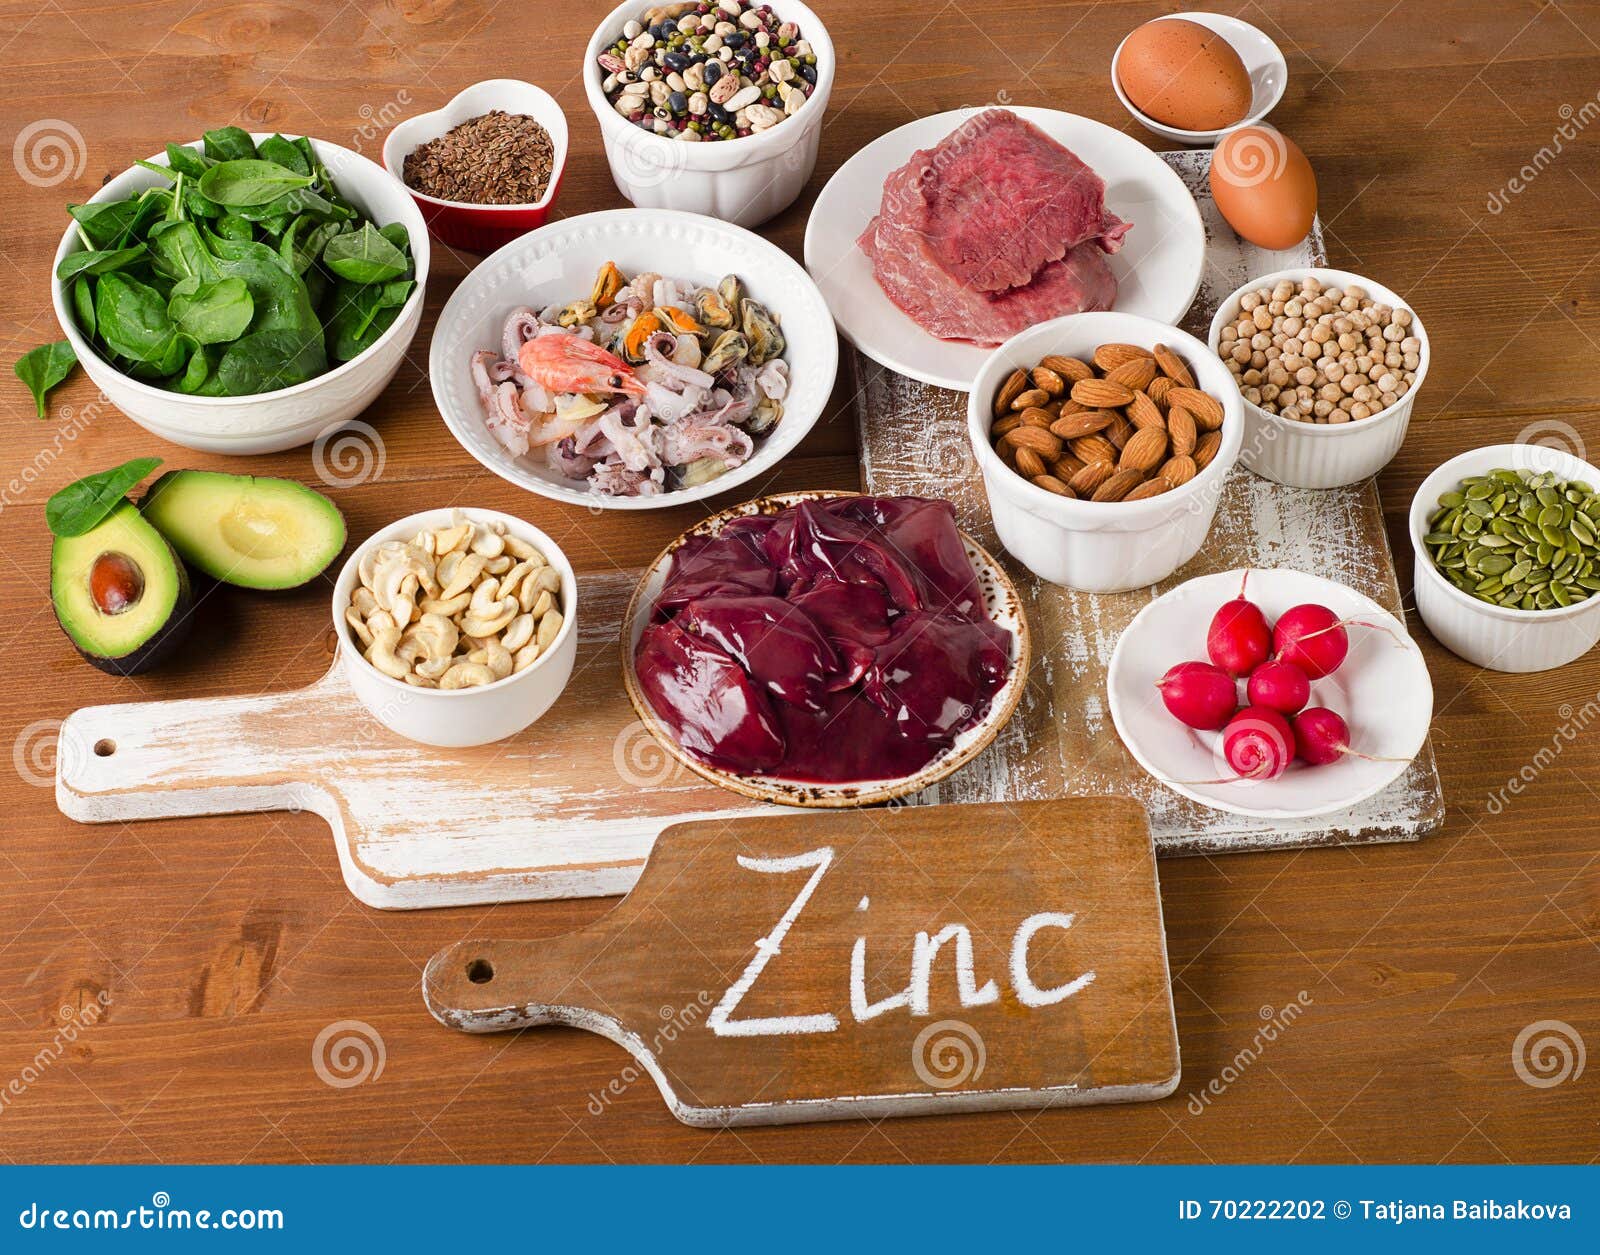 foods with zinc mineral on a wooden table.